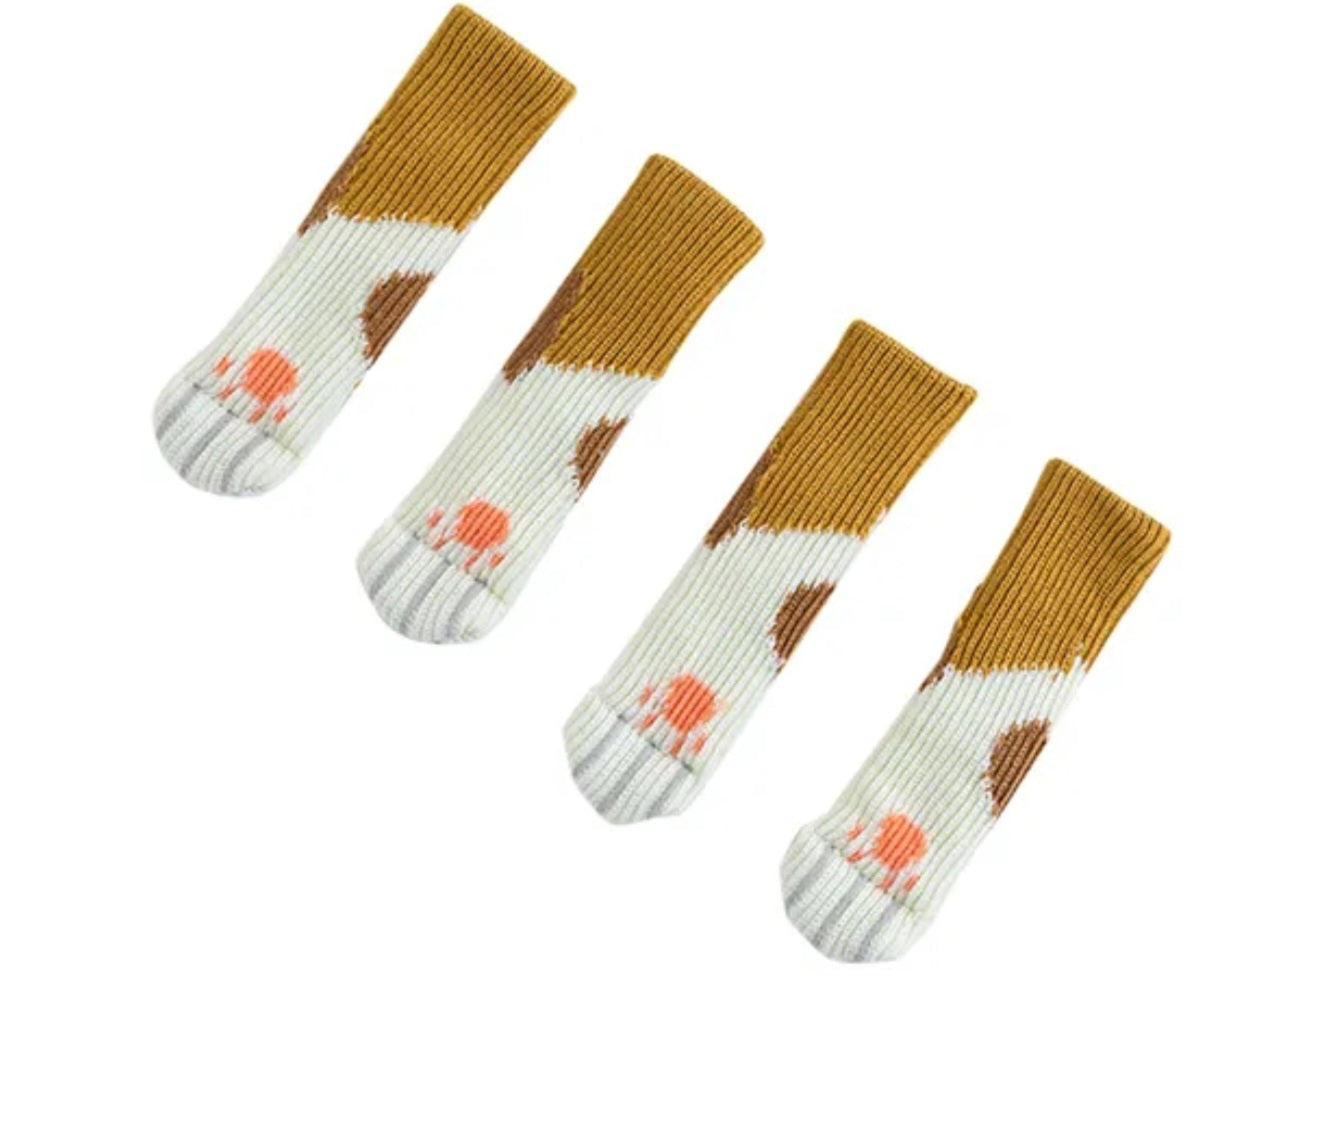 Chair and table leg socks scratch protection cat paws set of 4